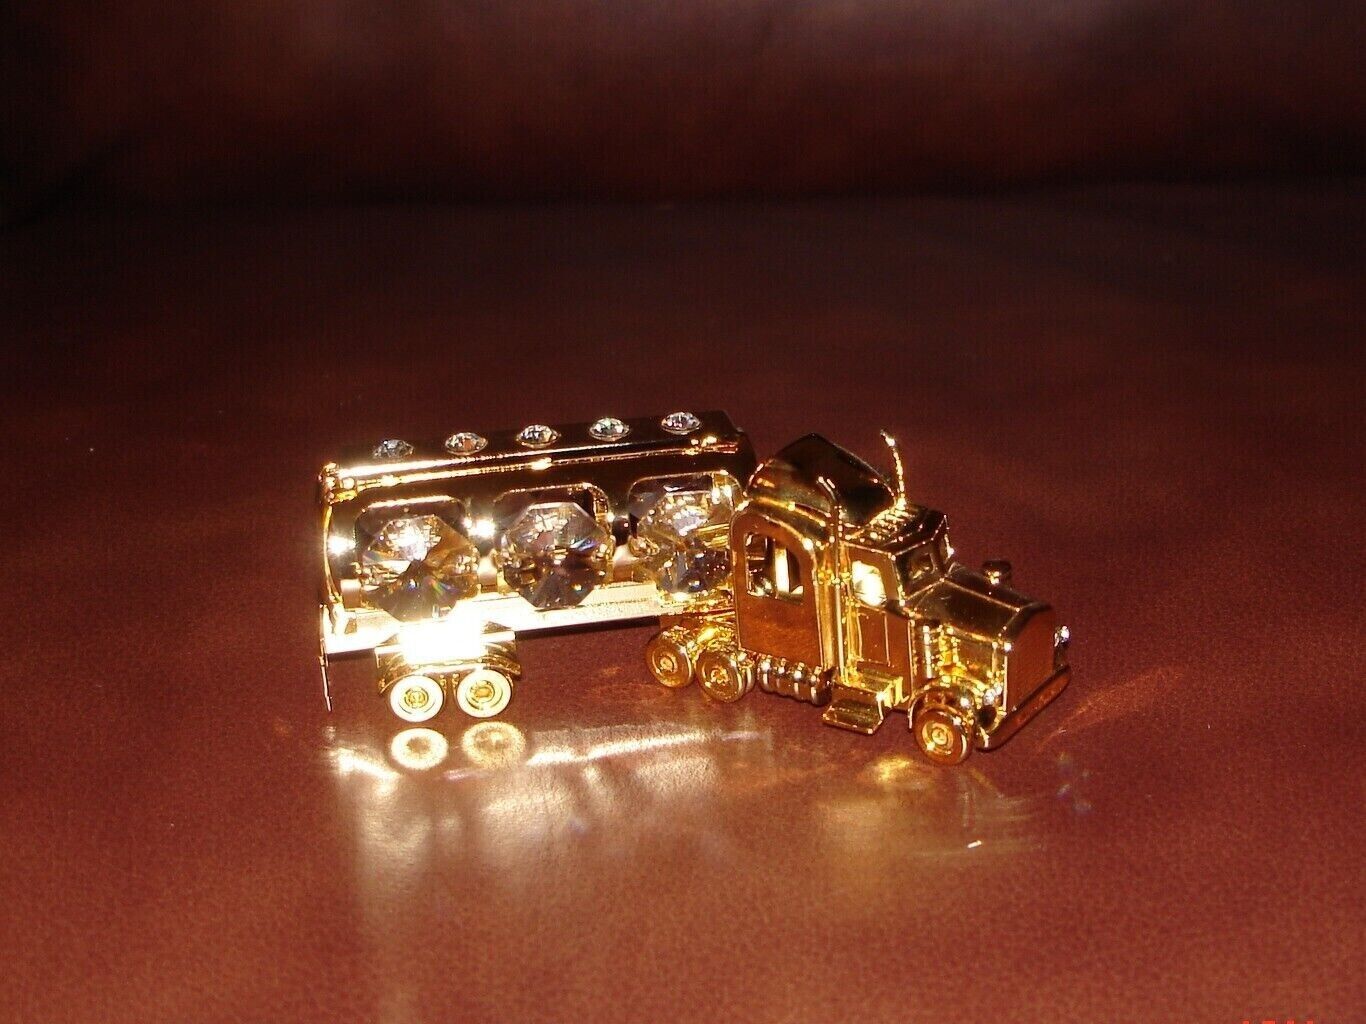 OIL TRUCK~24K GOLD PLATED FIGURINE MADE WITH SWAROVSKI CRYSTAL PARTS